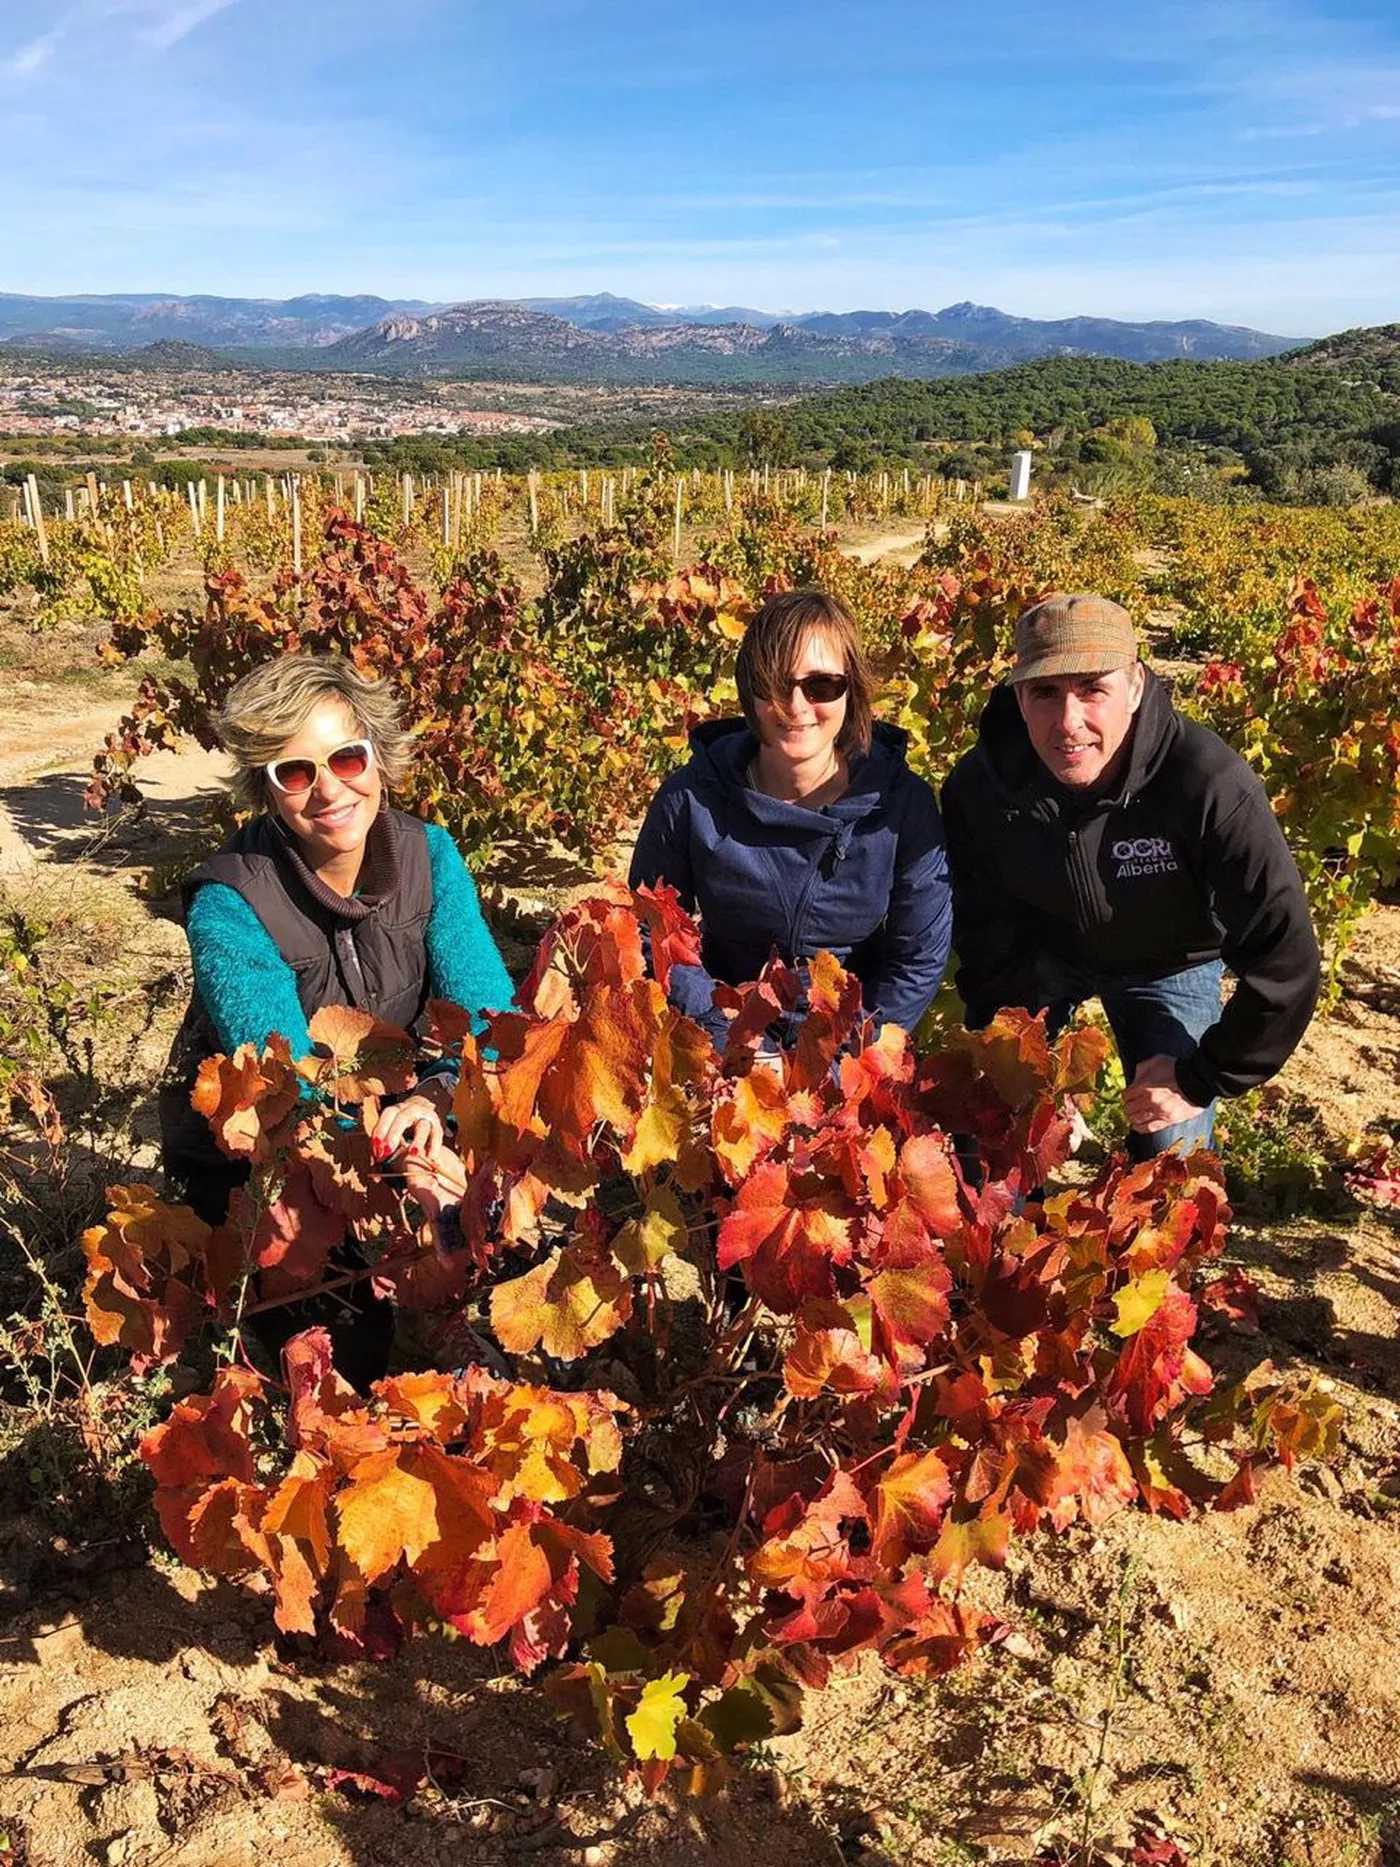 Madrid vineyard in autumn colorful wines